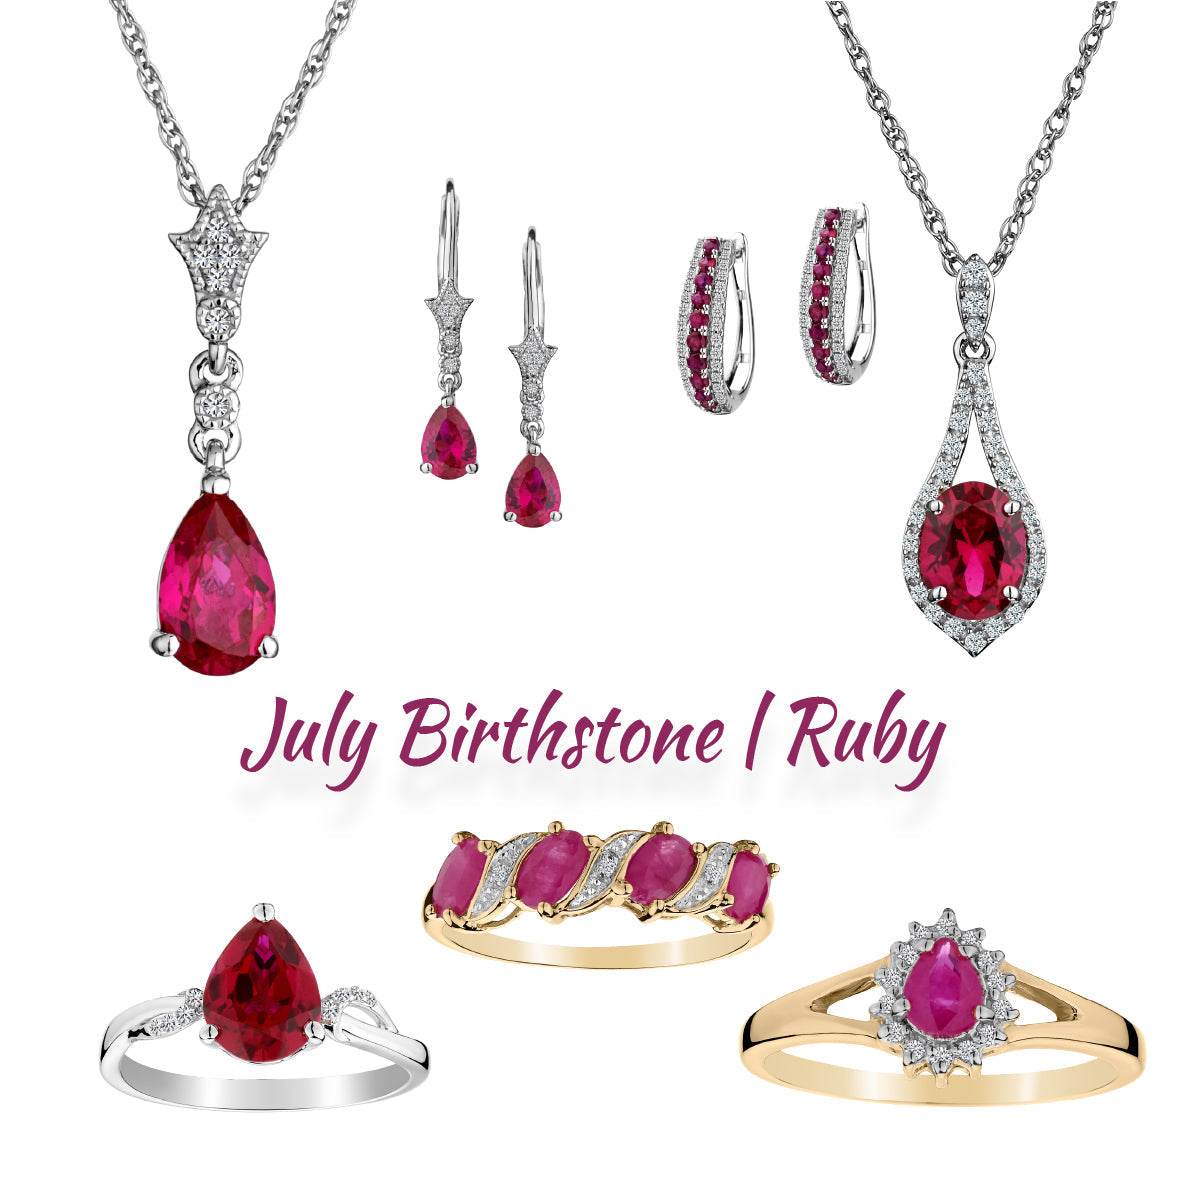 Ruby jewellery: pendants, earrings, rings (silver and gold).